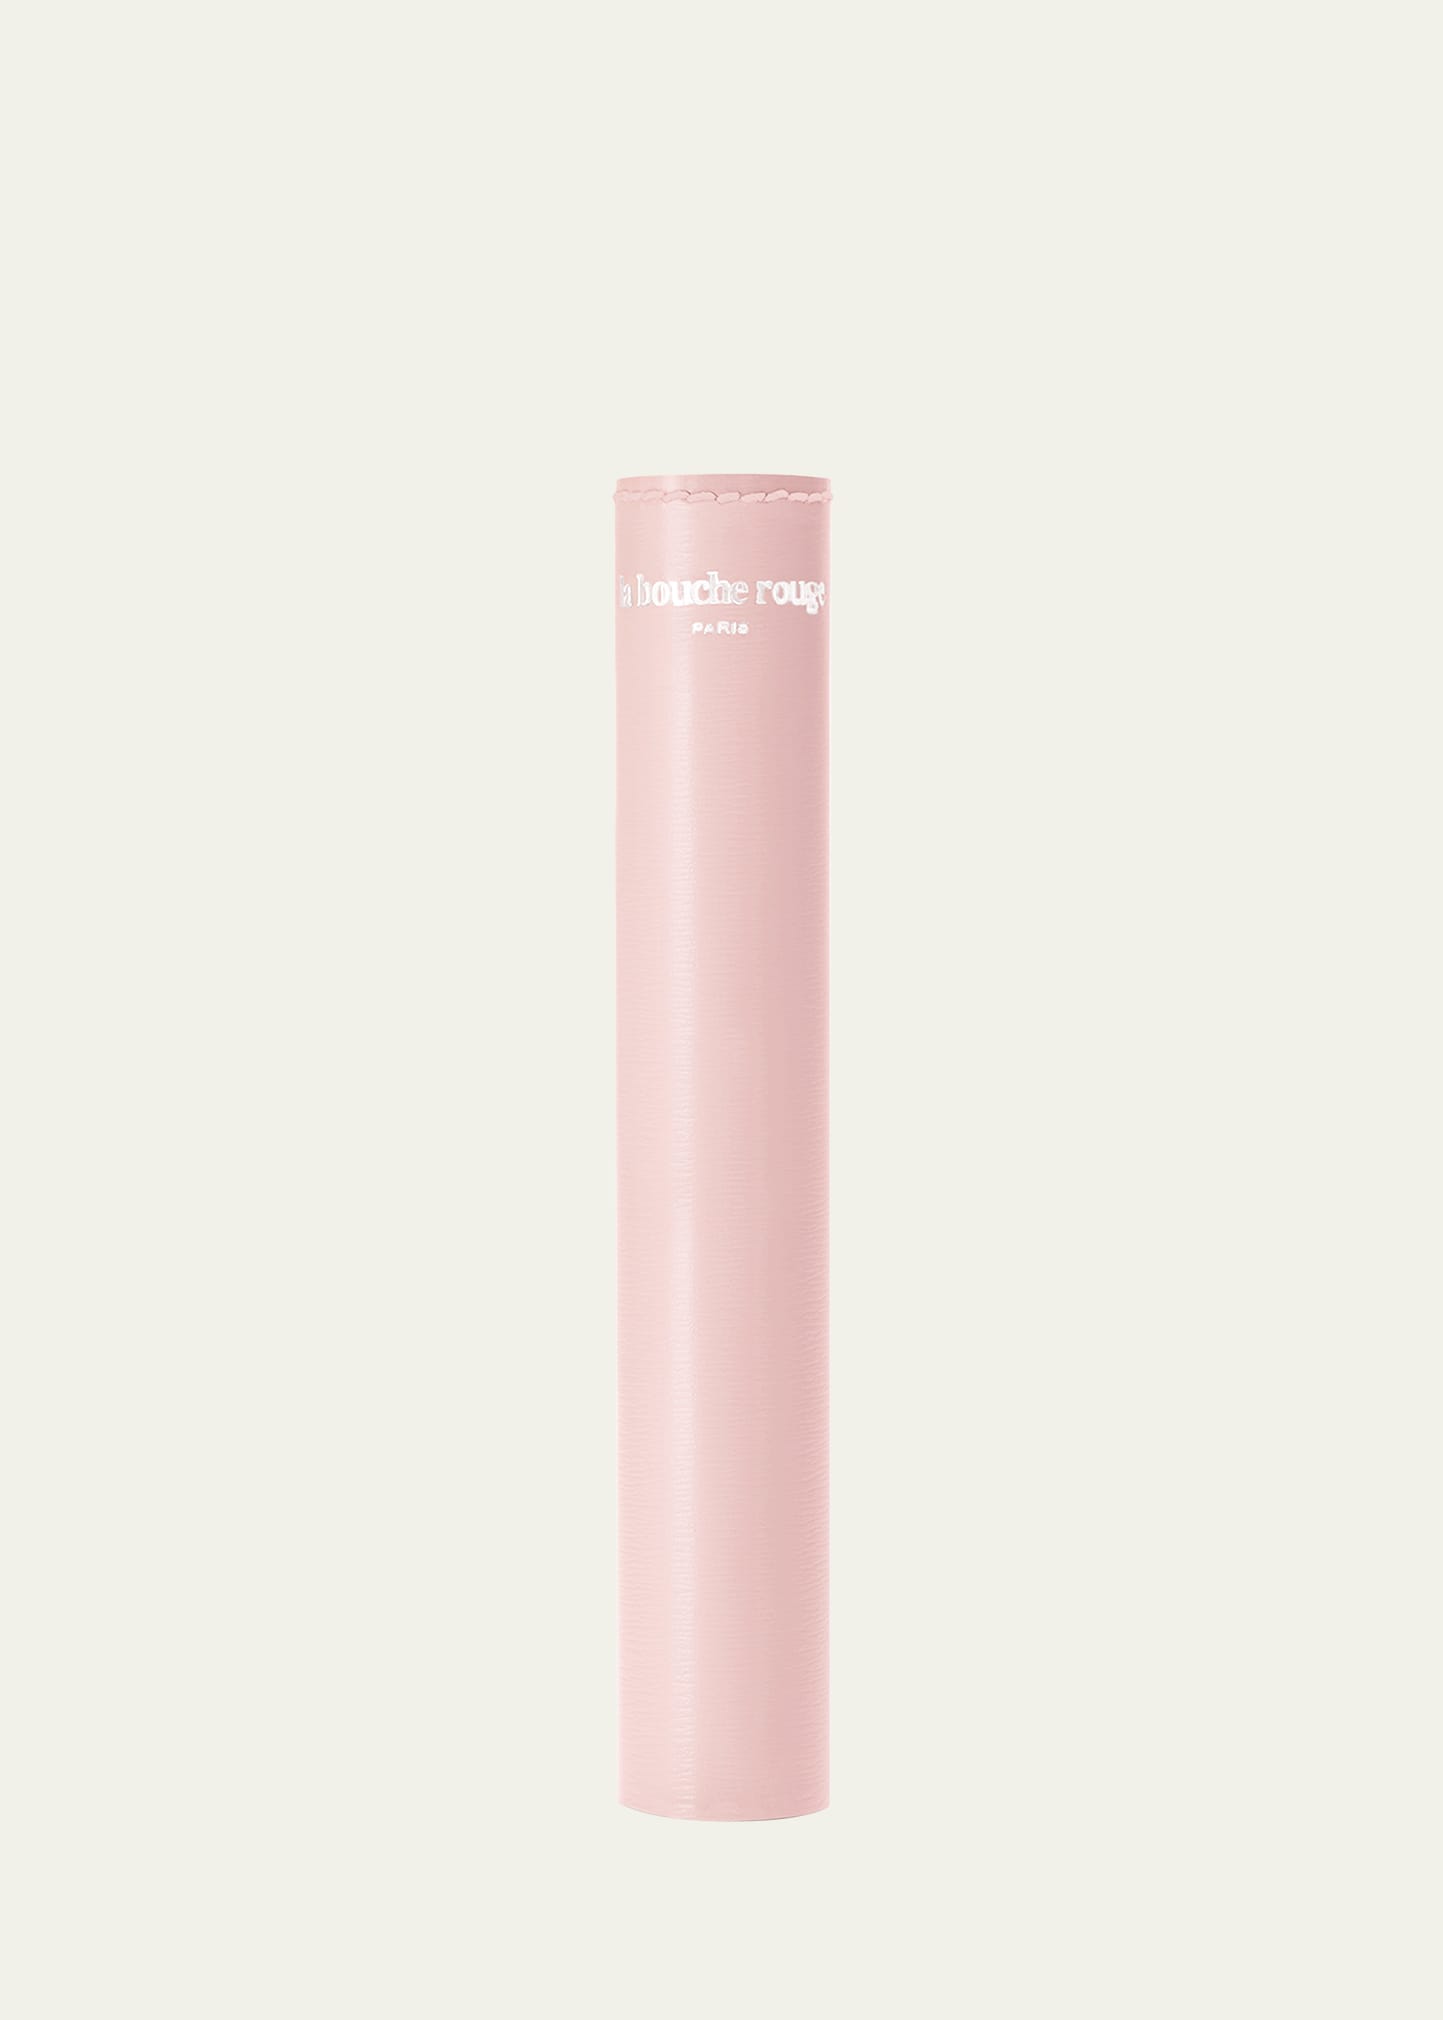 La Bouche Rouge Mascara Leather Case In Pink